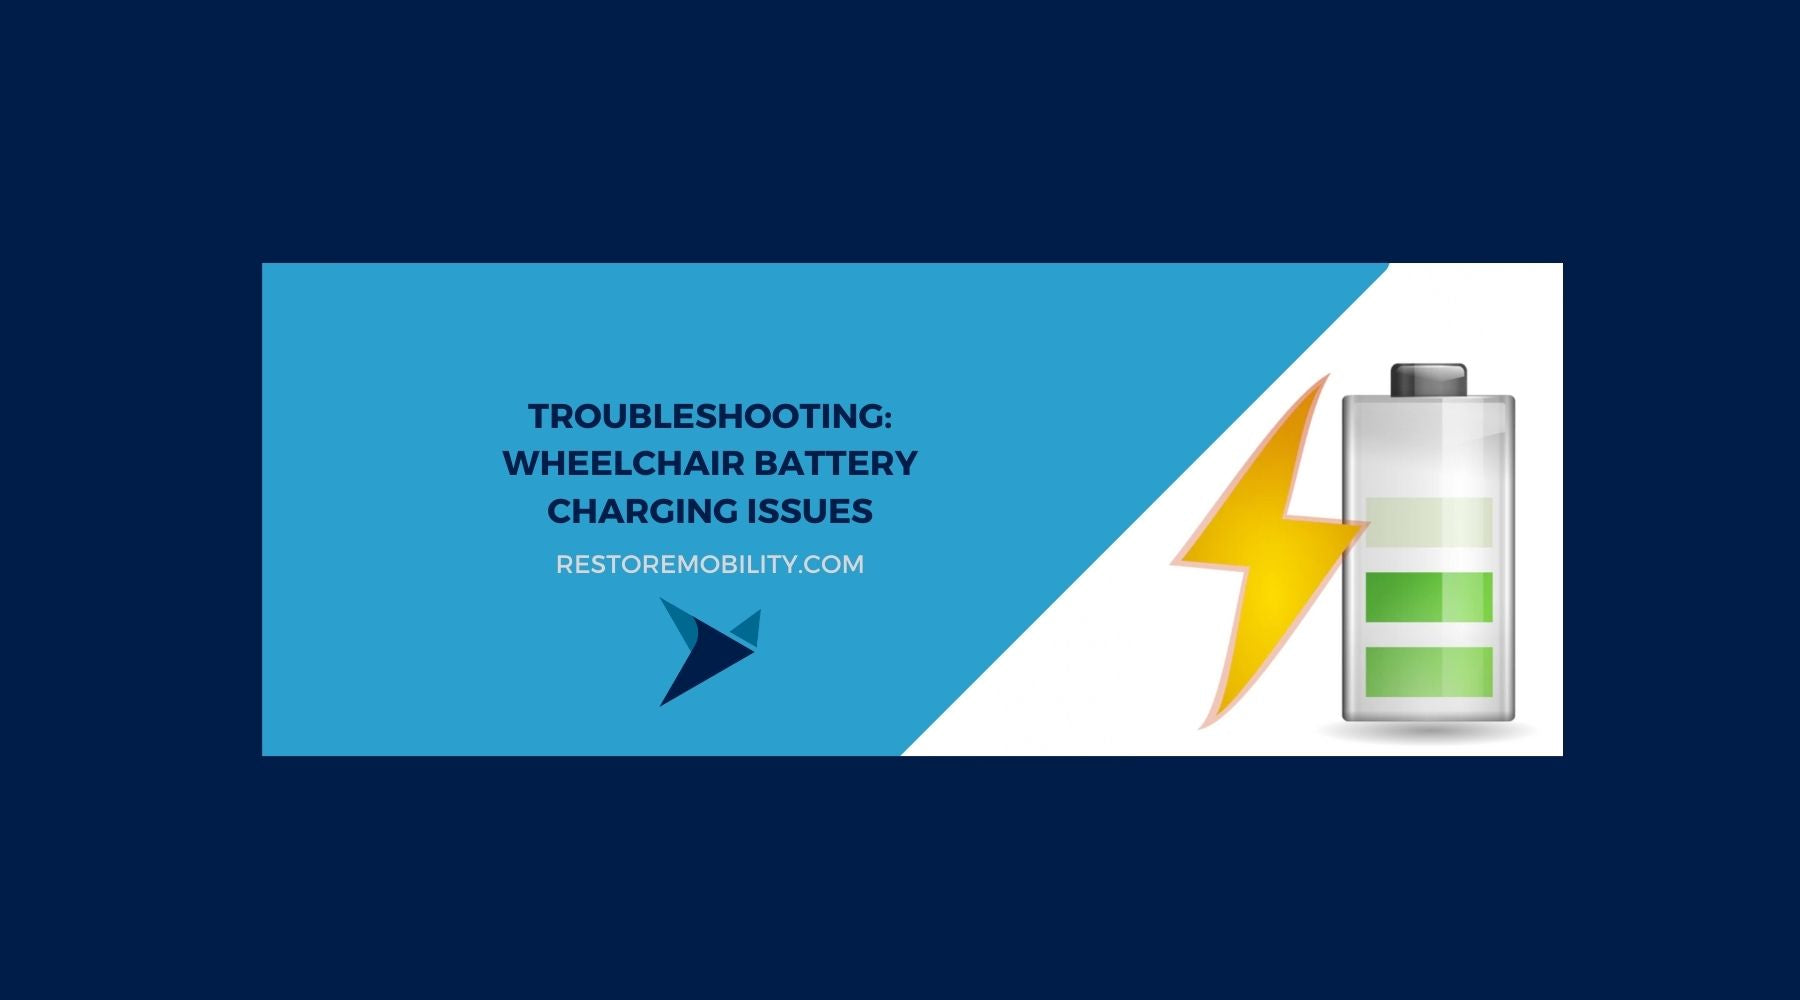 Troubleshooting: Wheelchair Battery Charging Issues